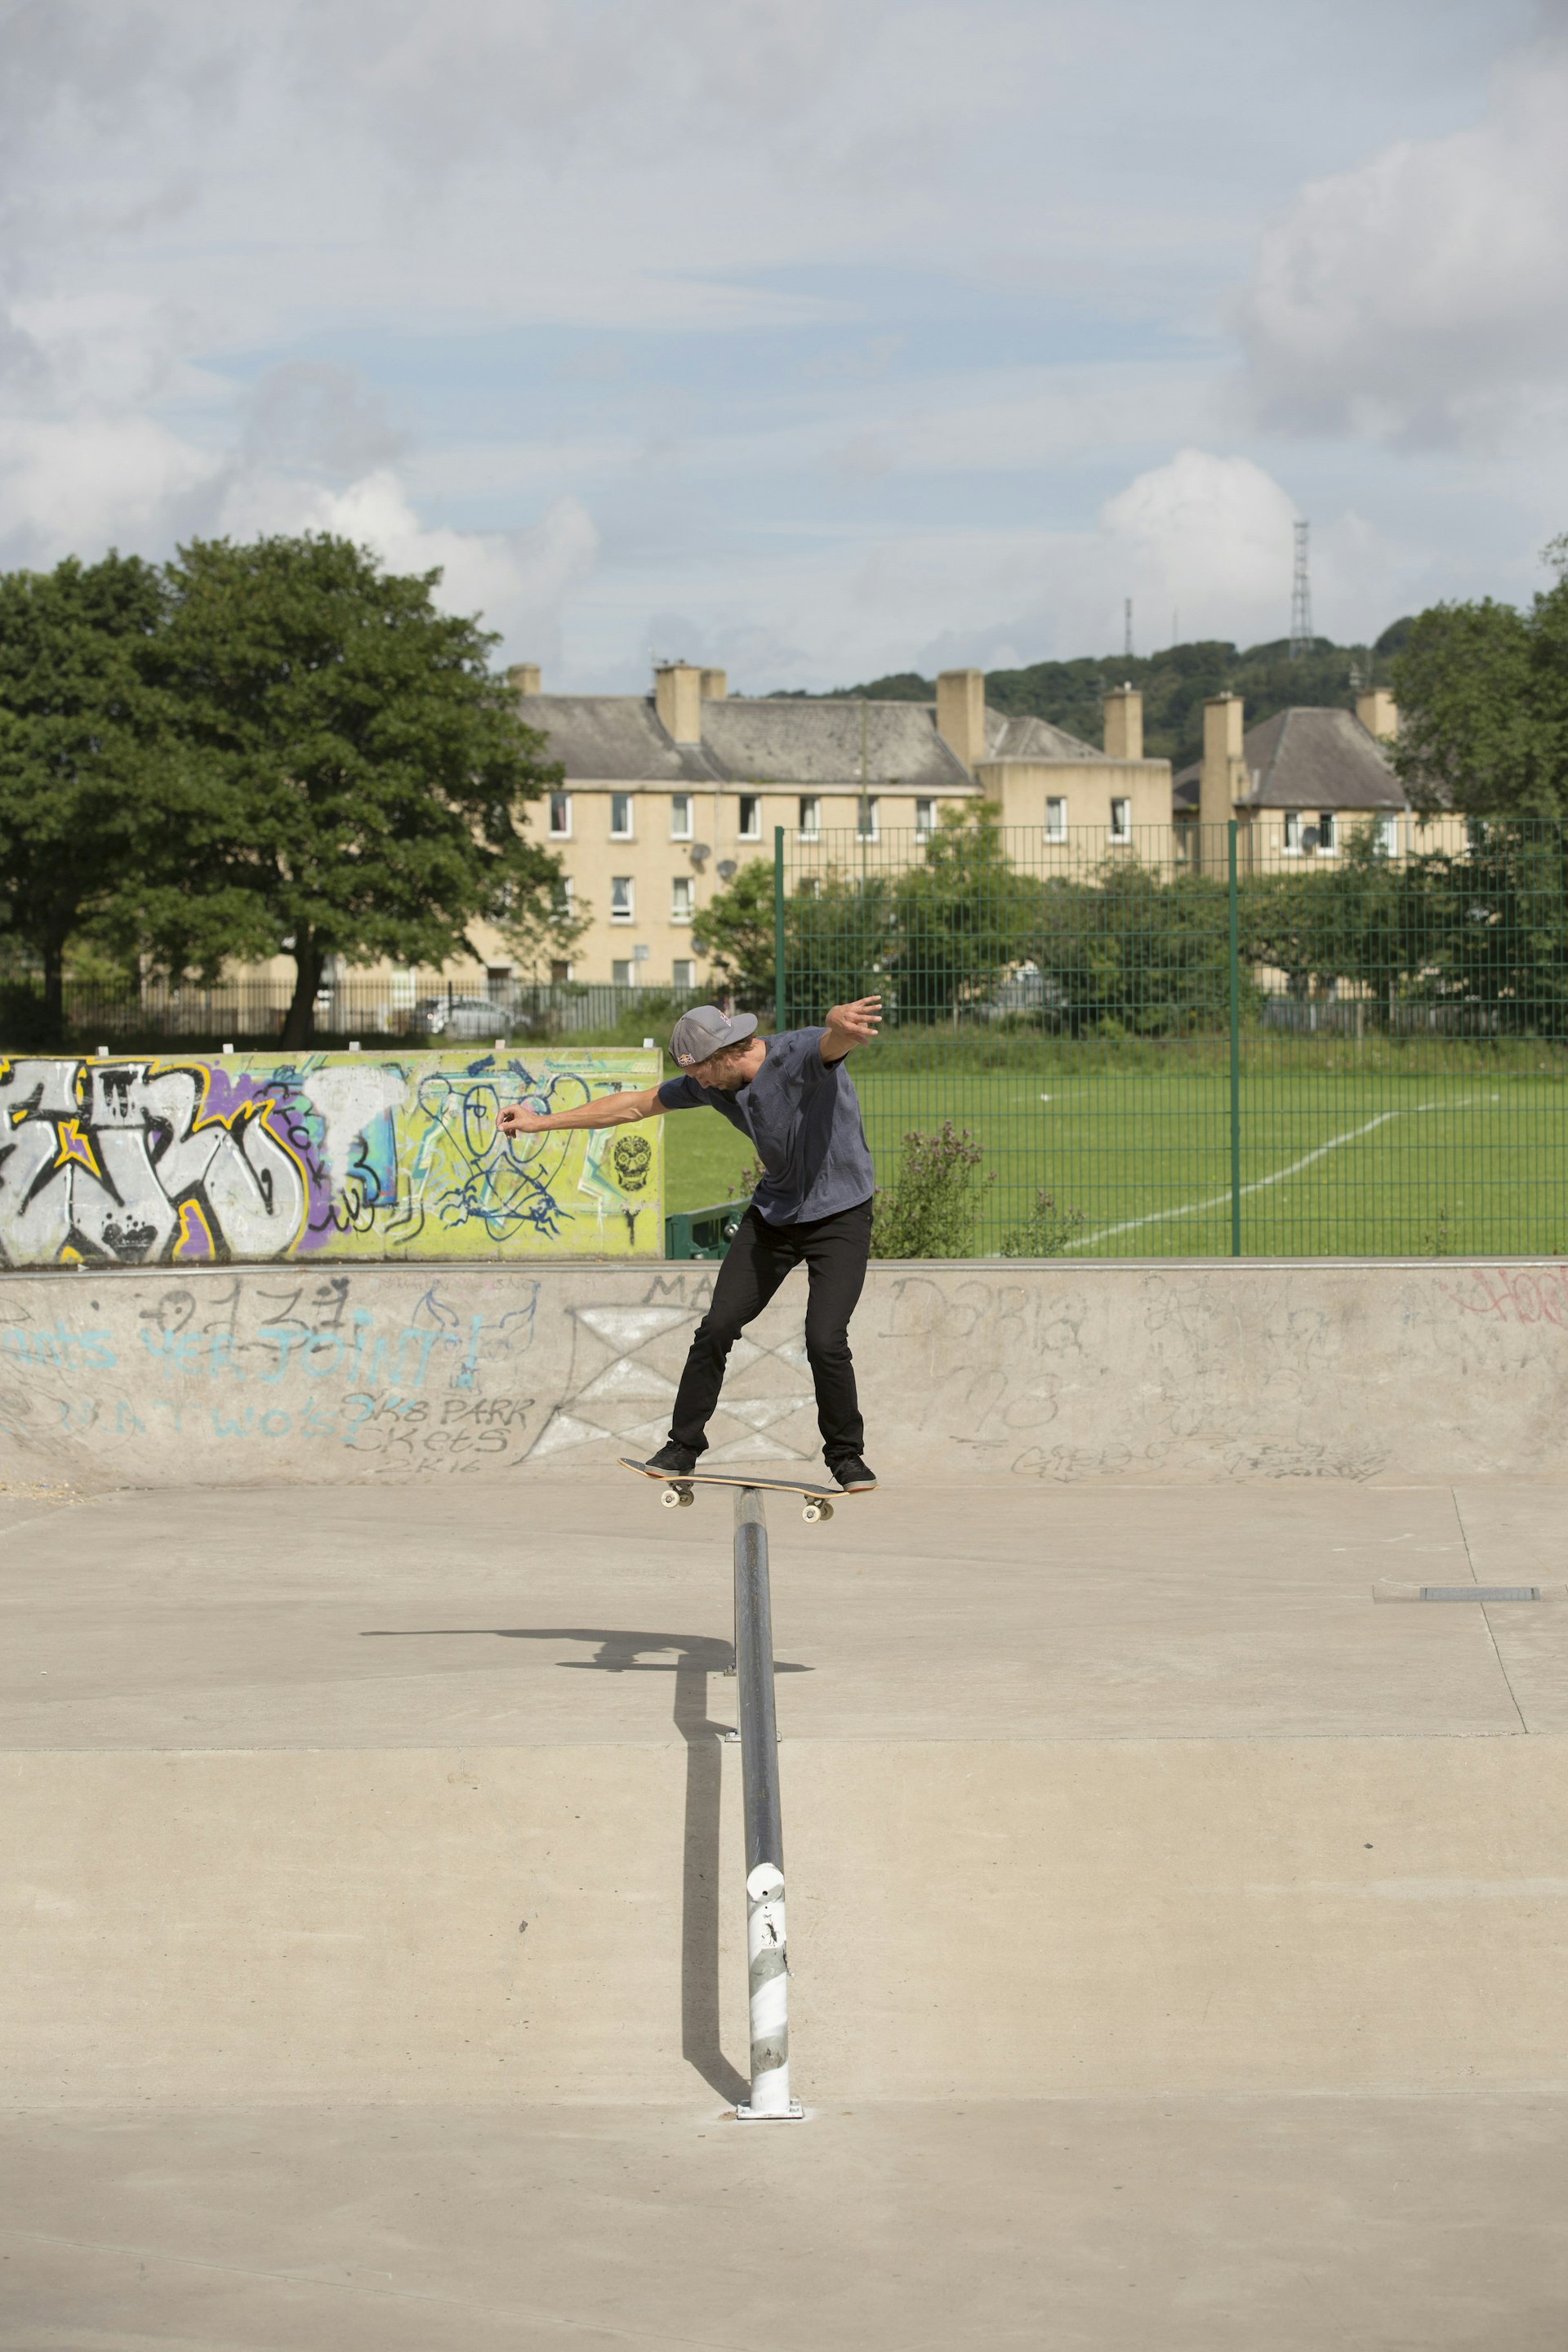 A skateboarder performs a trick on a rail